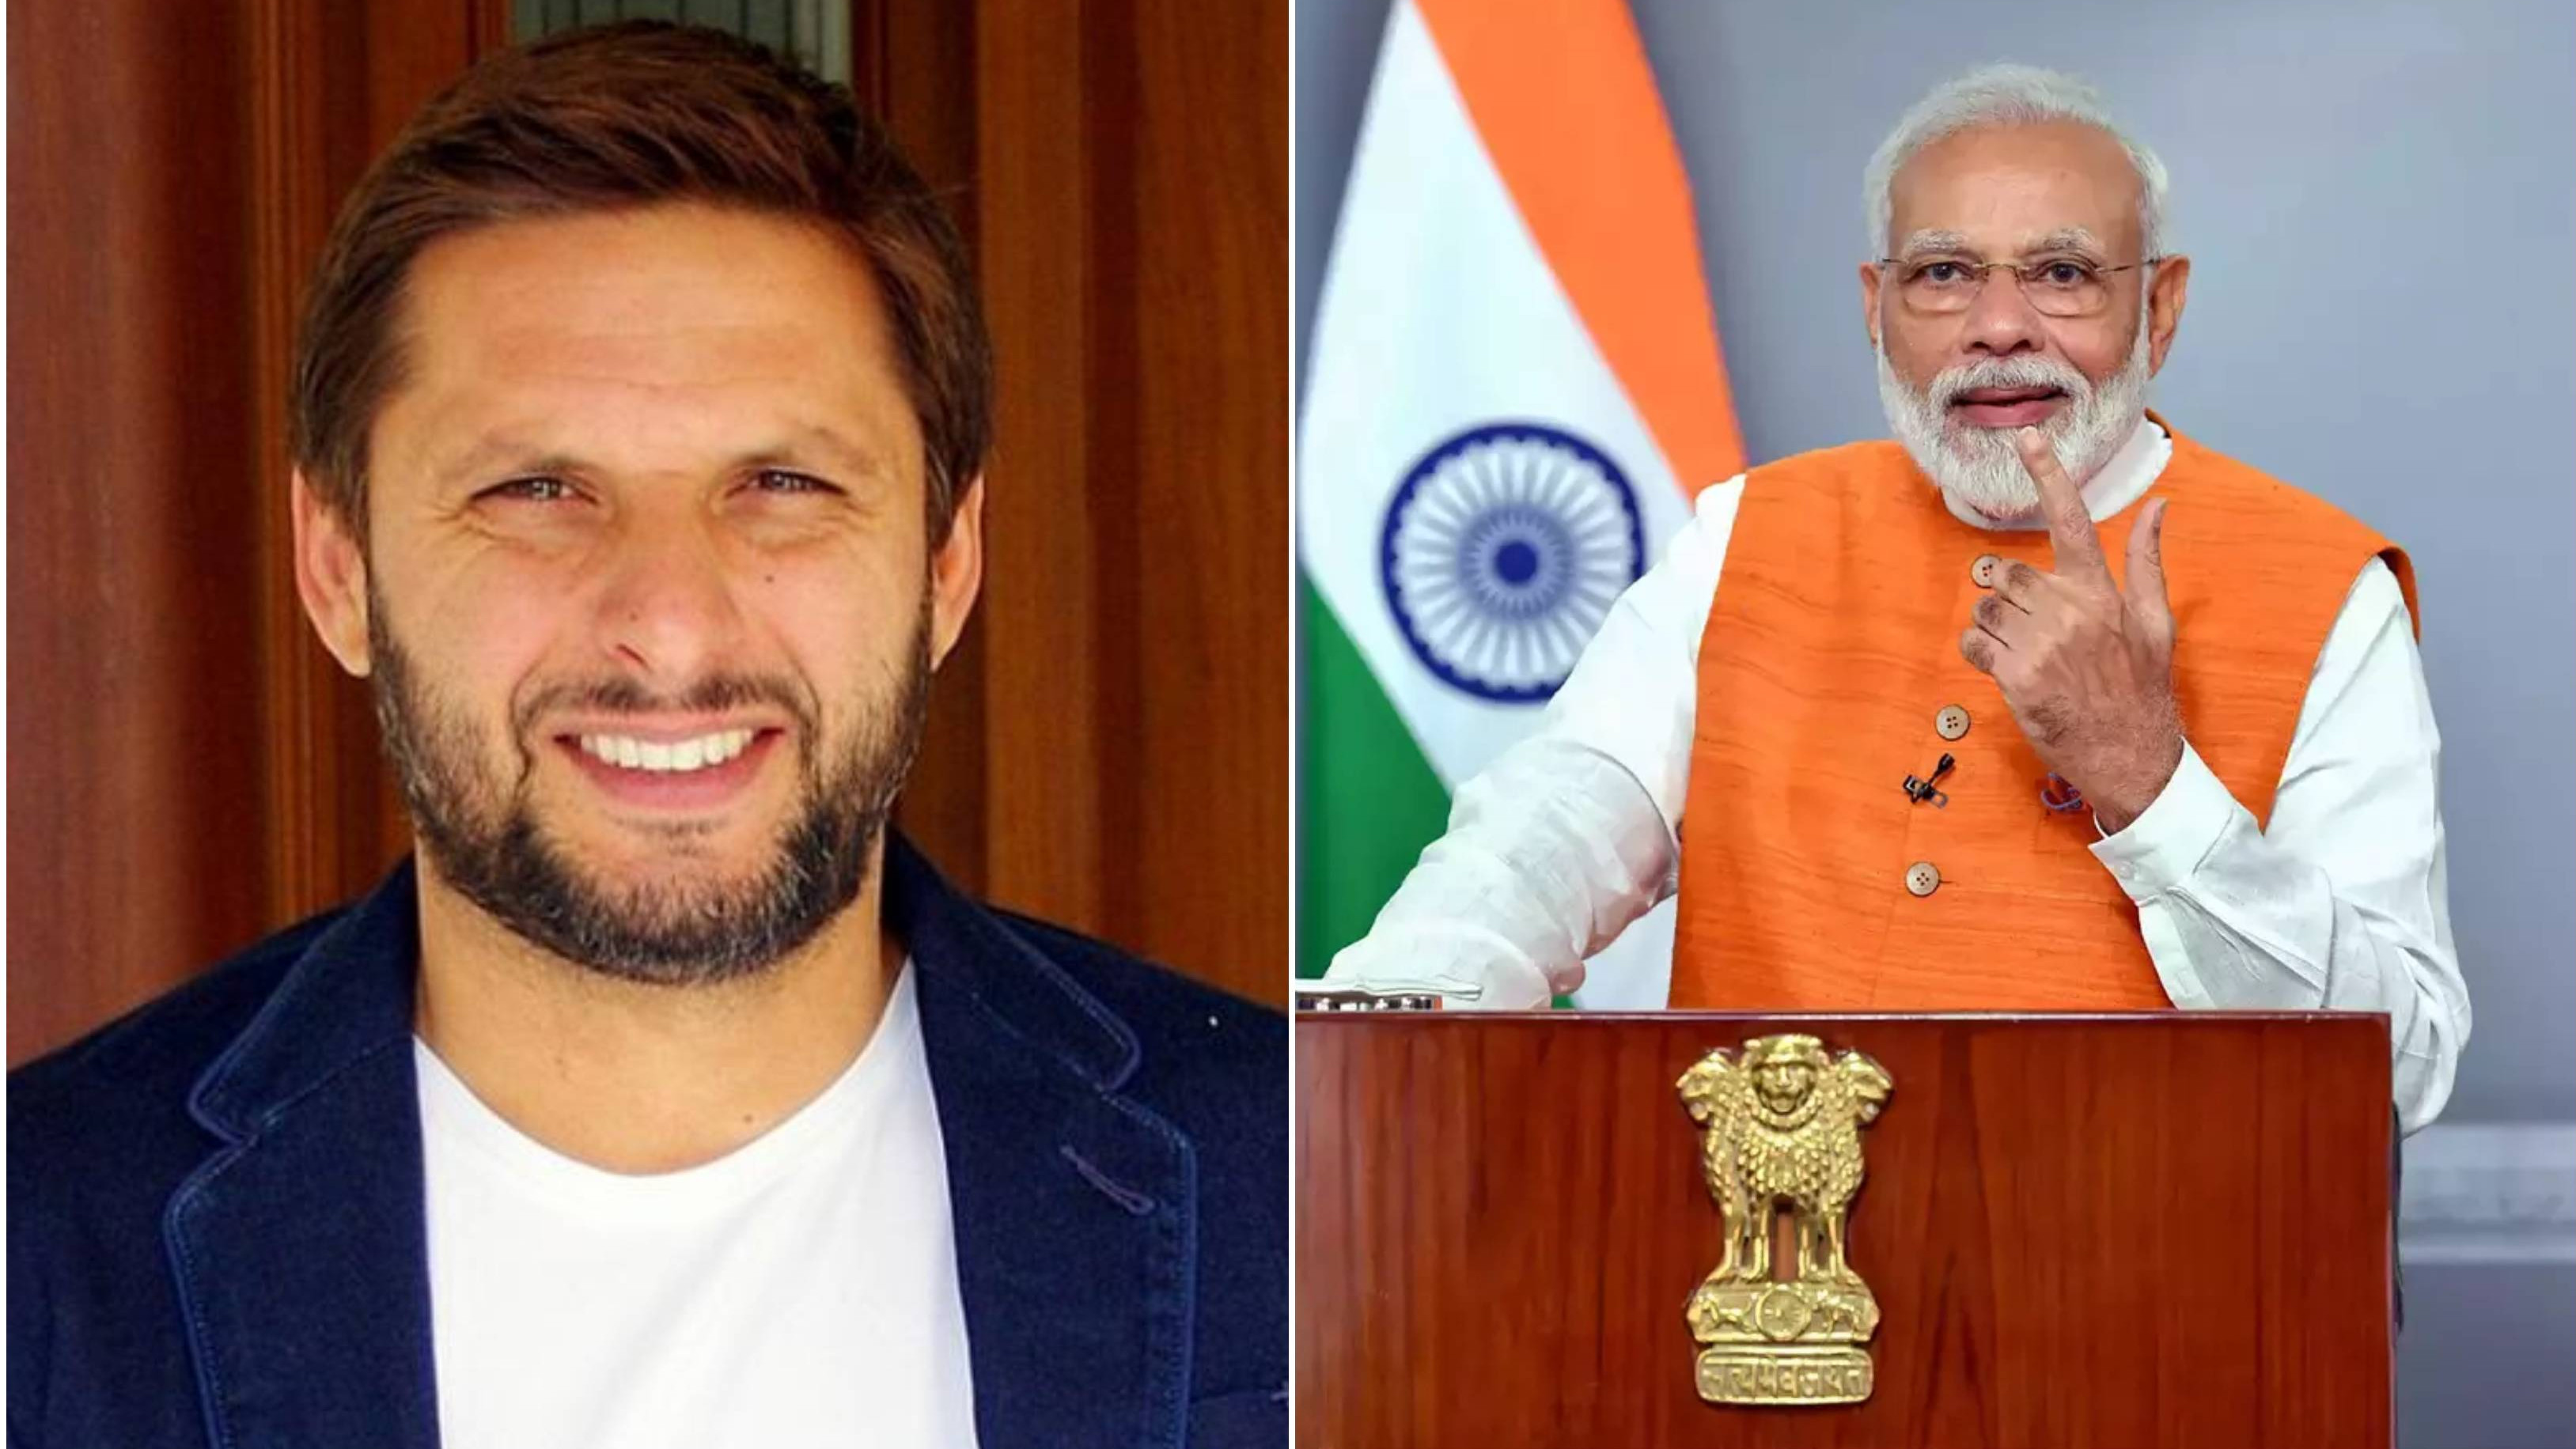 “Let cricket happen between both countries,” Shahid Afridi’s request to Indian Prime Minister Narendra Modi